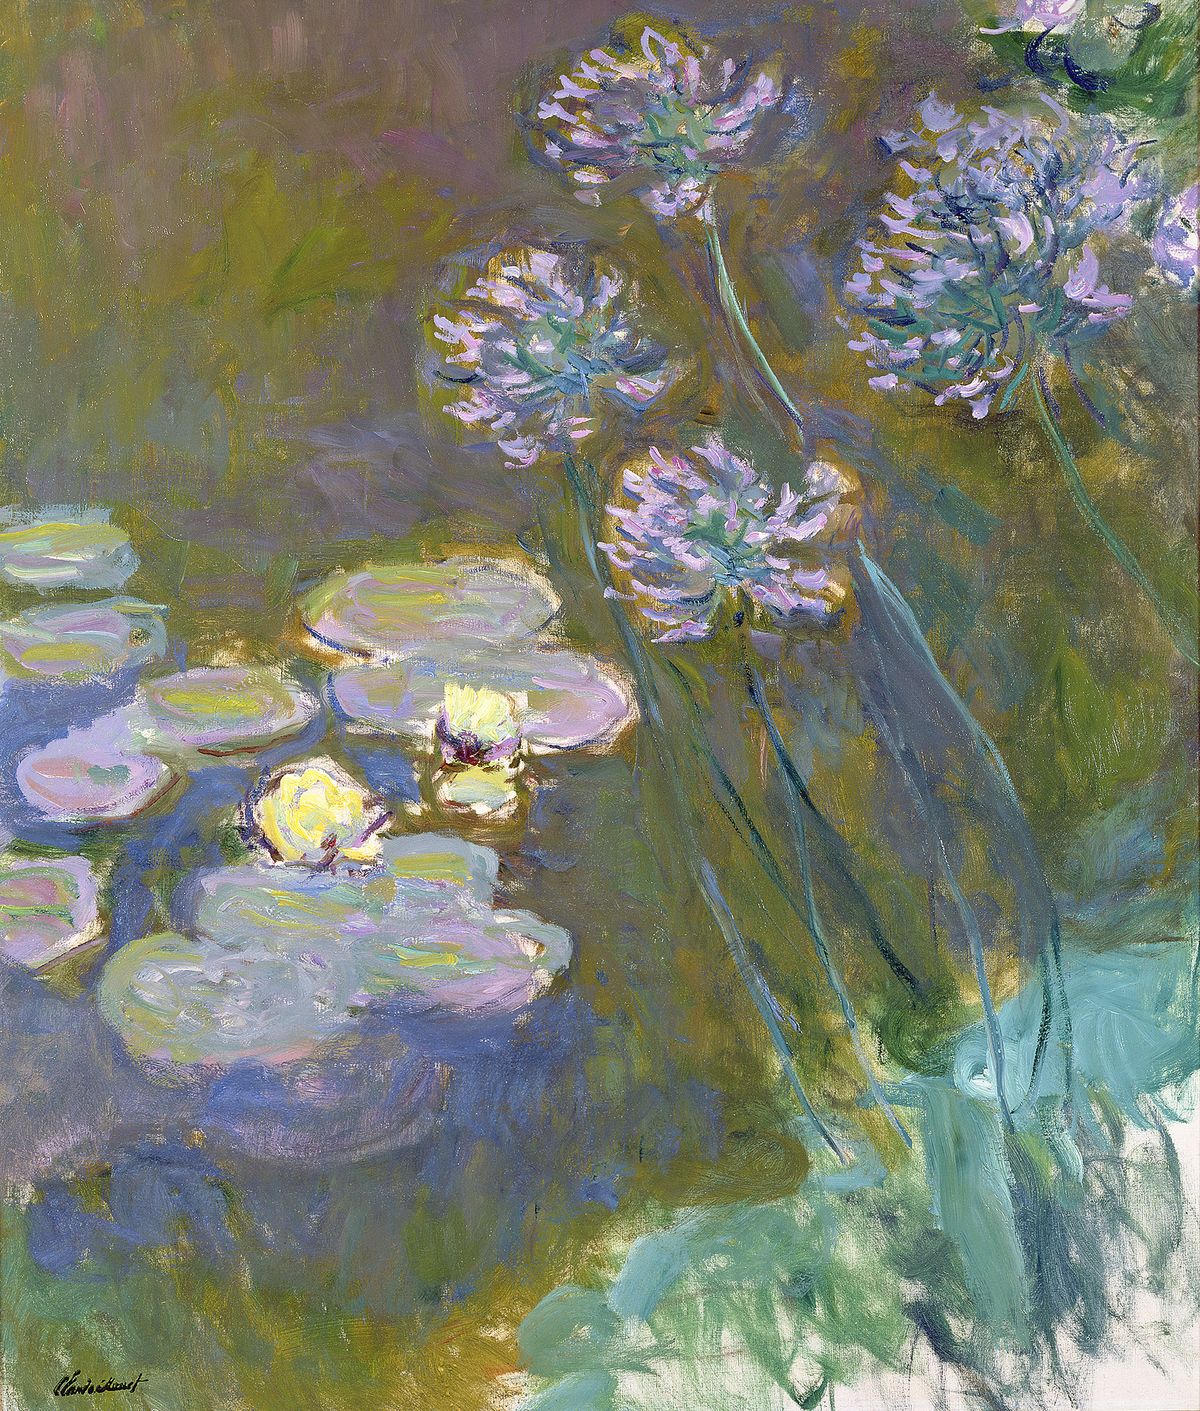 Claude Monet’s Water Lilies and Agapanthus (1914-17) Courtesy of the Musée Marmottan Monet in Paris